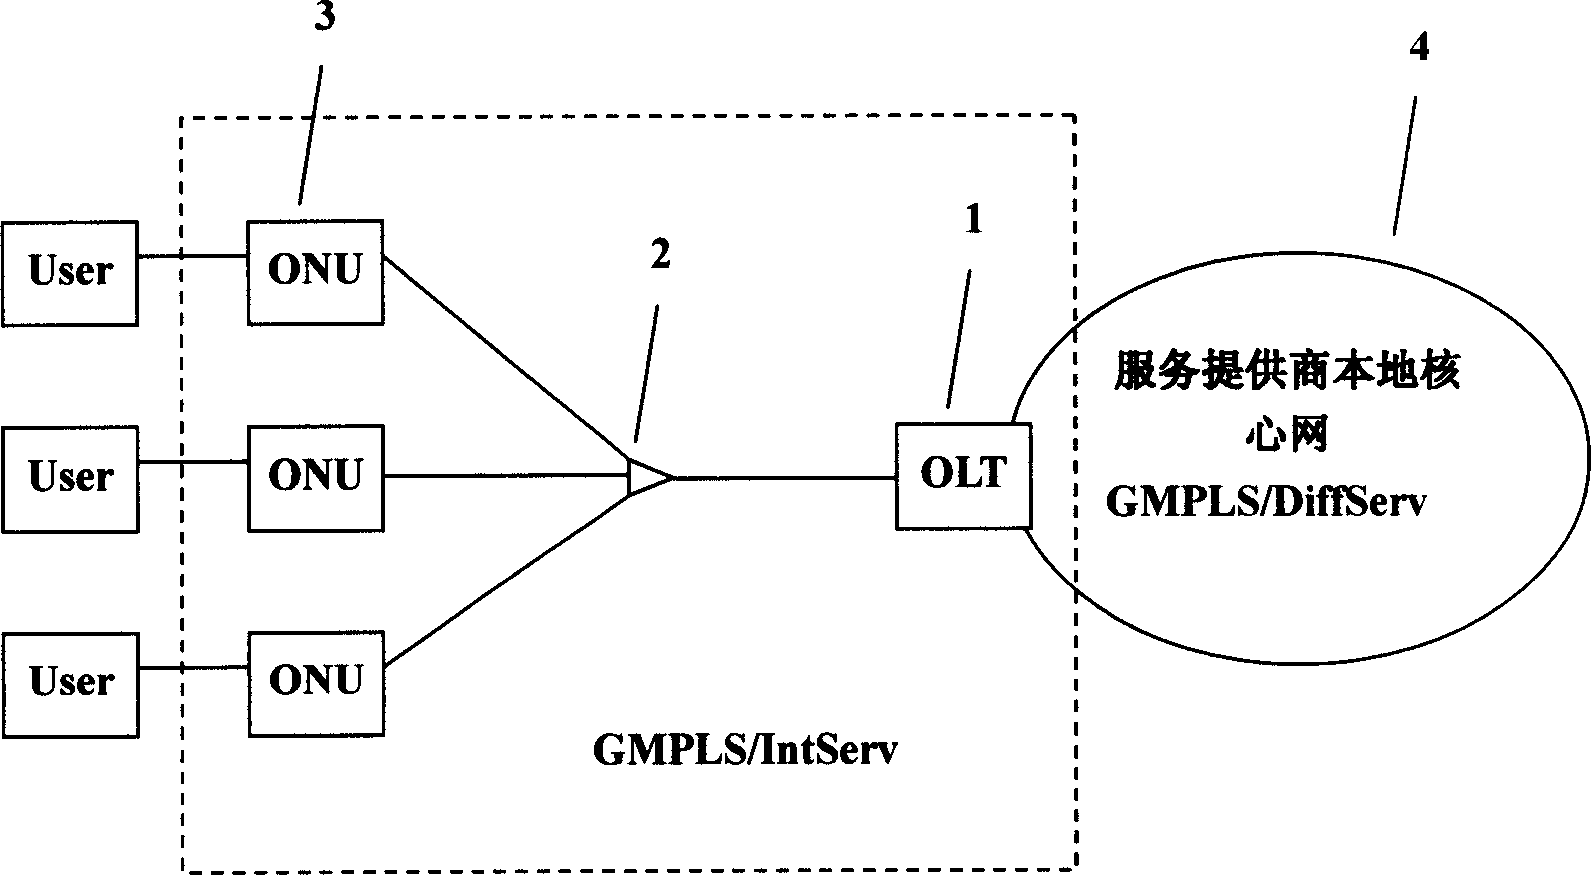 Passive optical network system based on generalized multiprotocol label switching (GMPLS) protocol